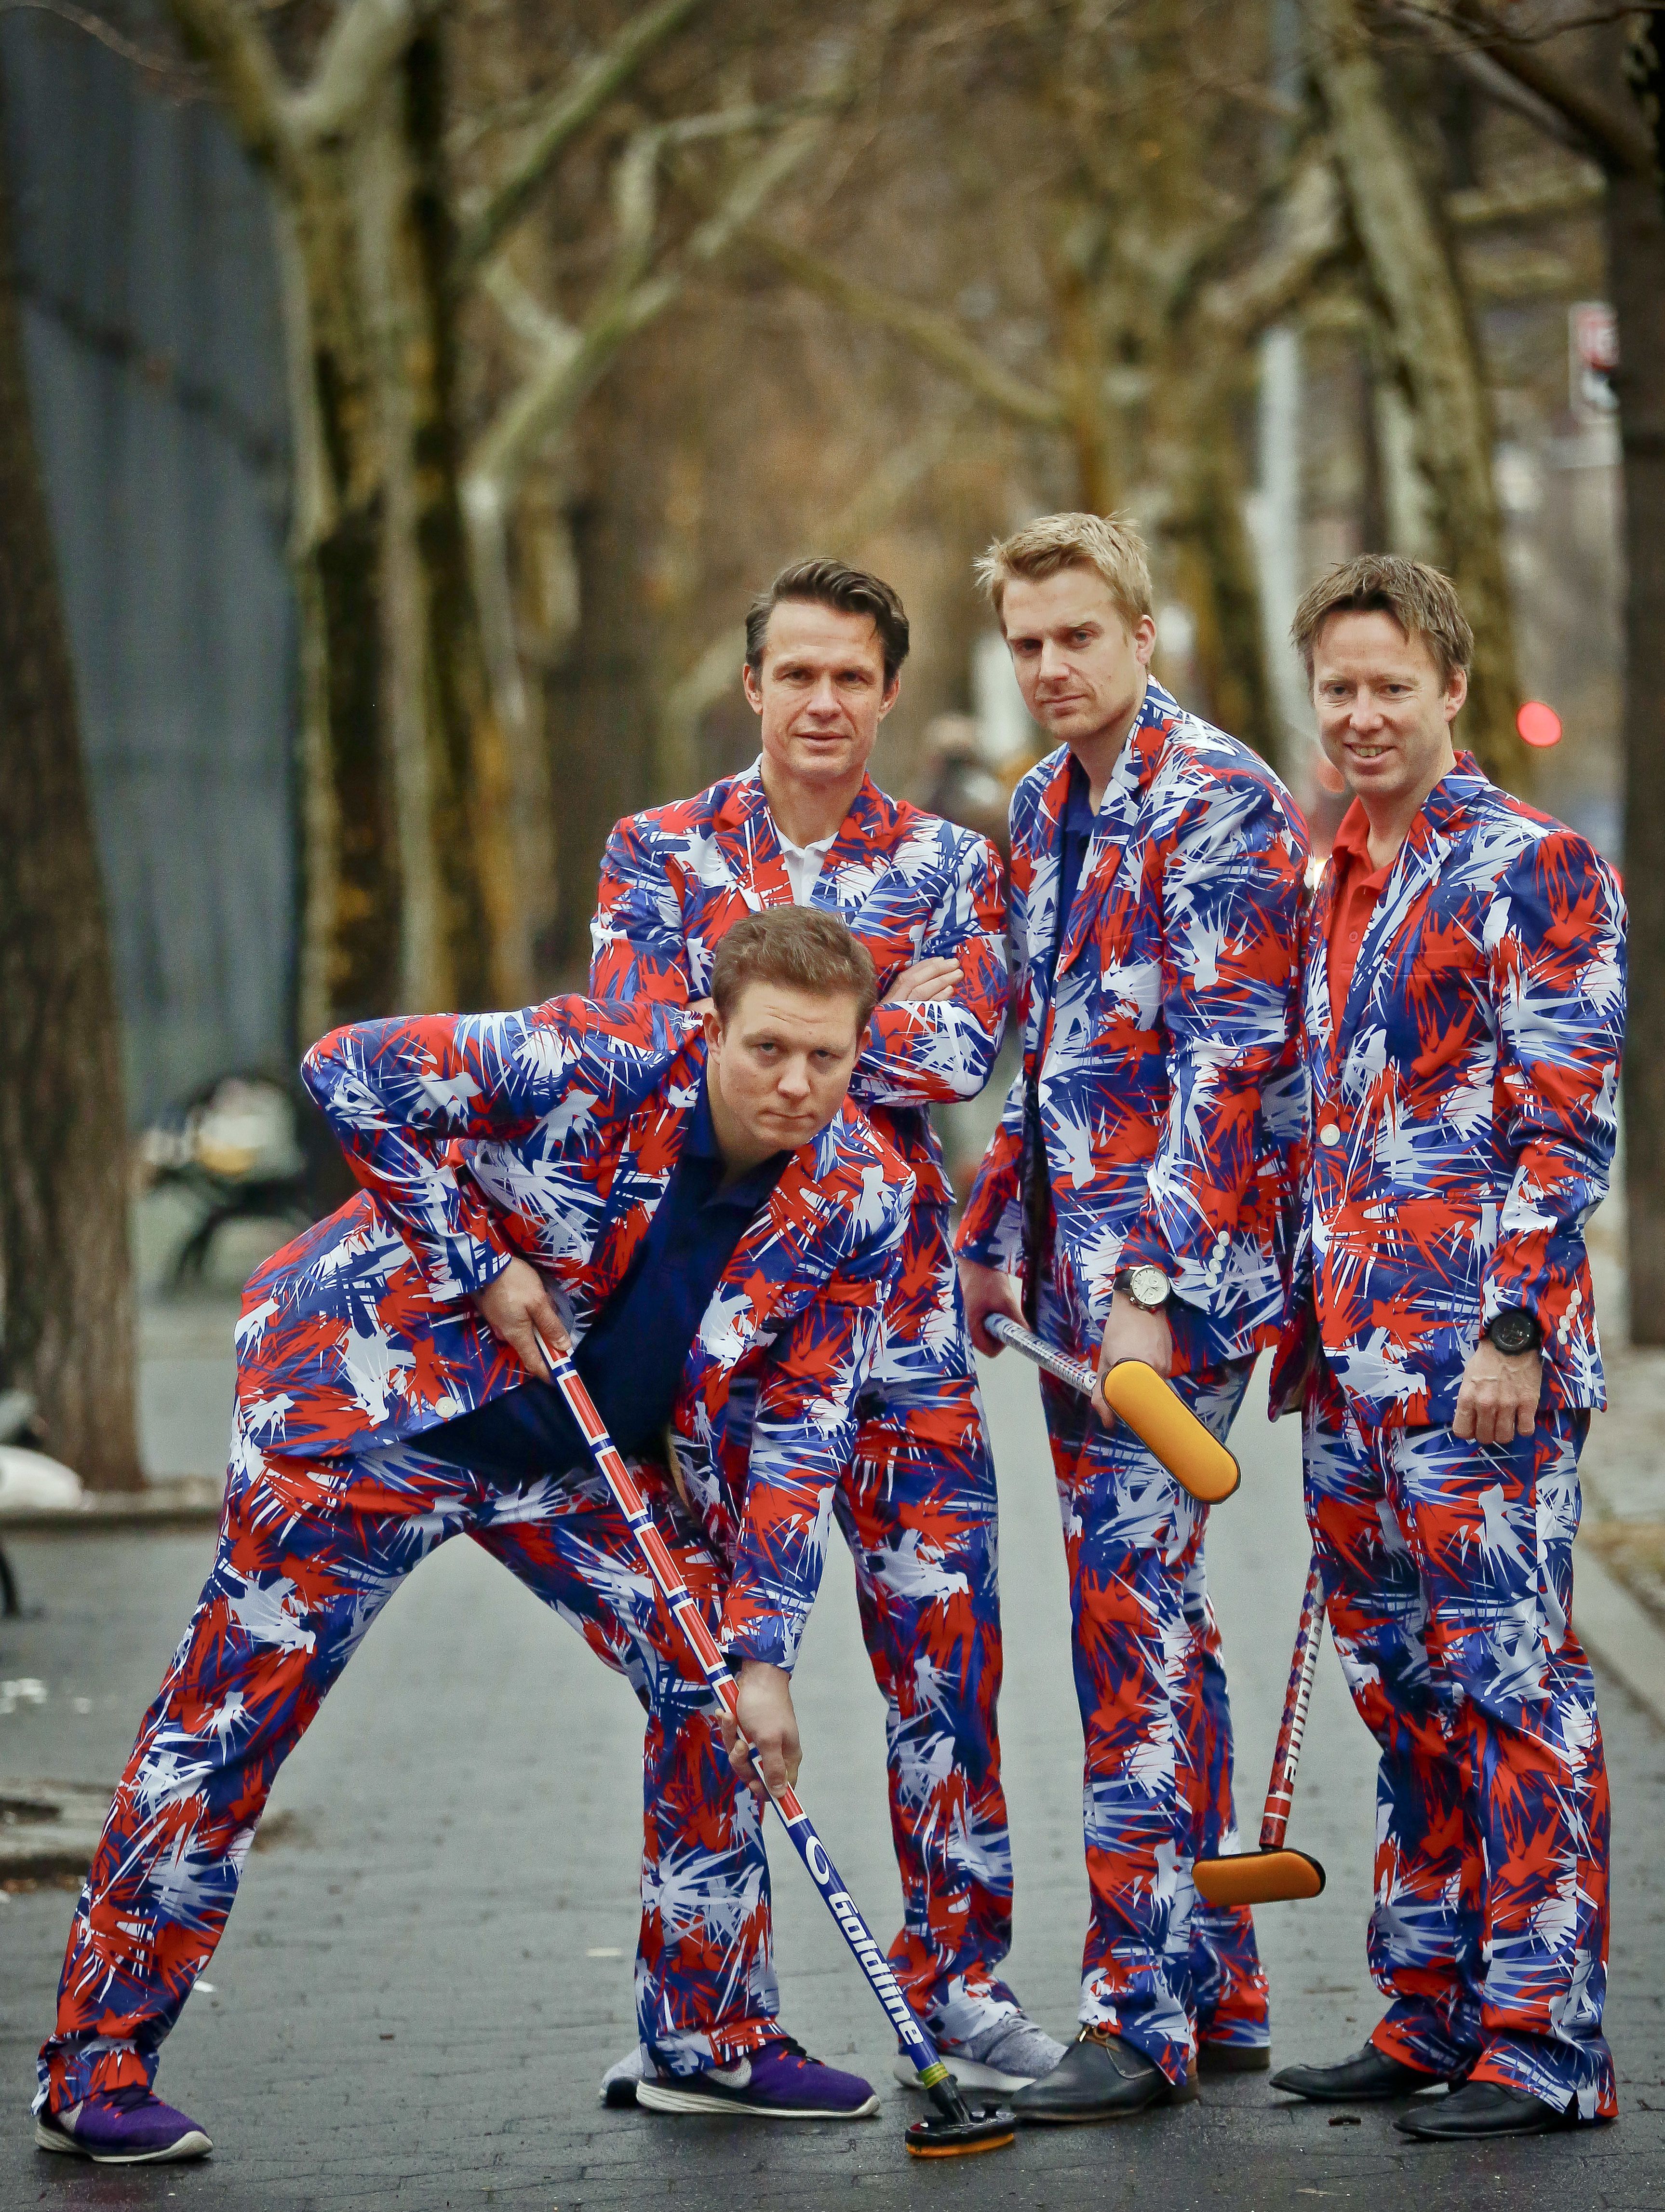 Norway's curling team drops an impressive collection of pants